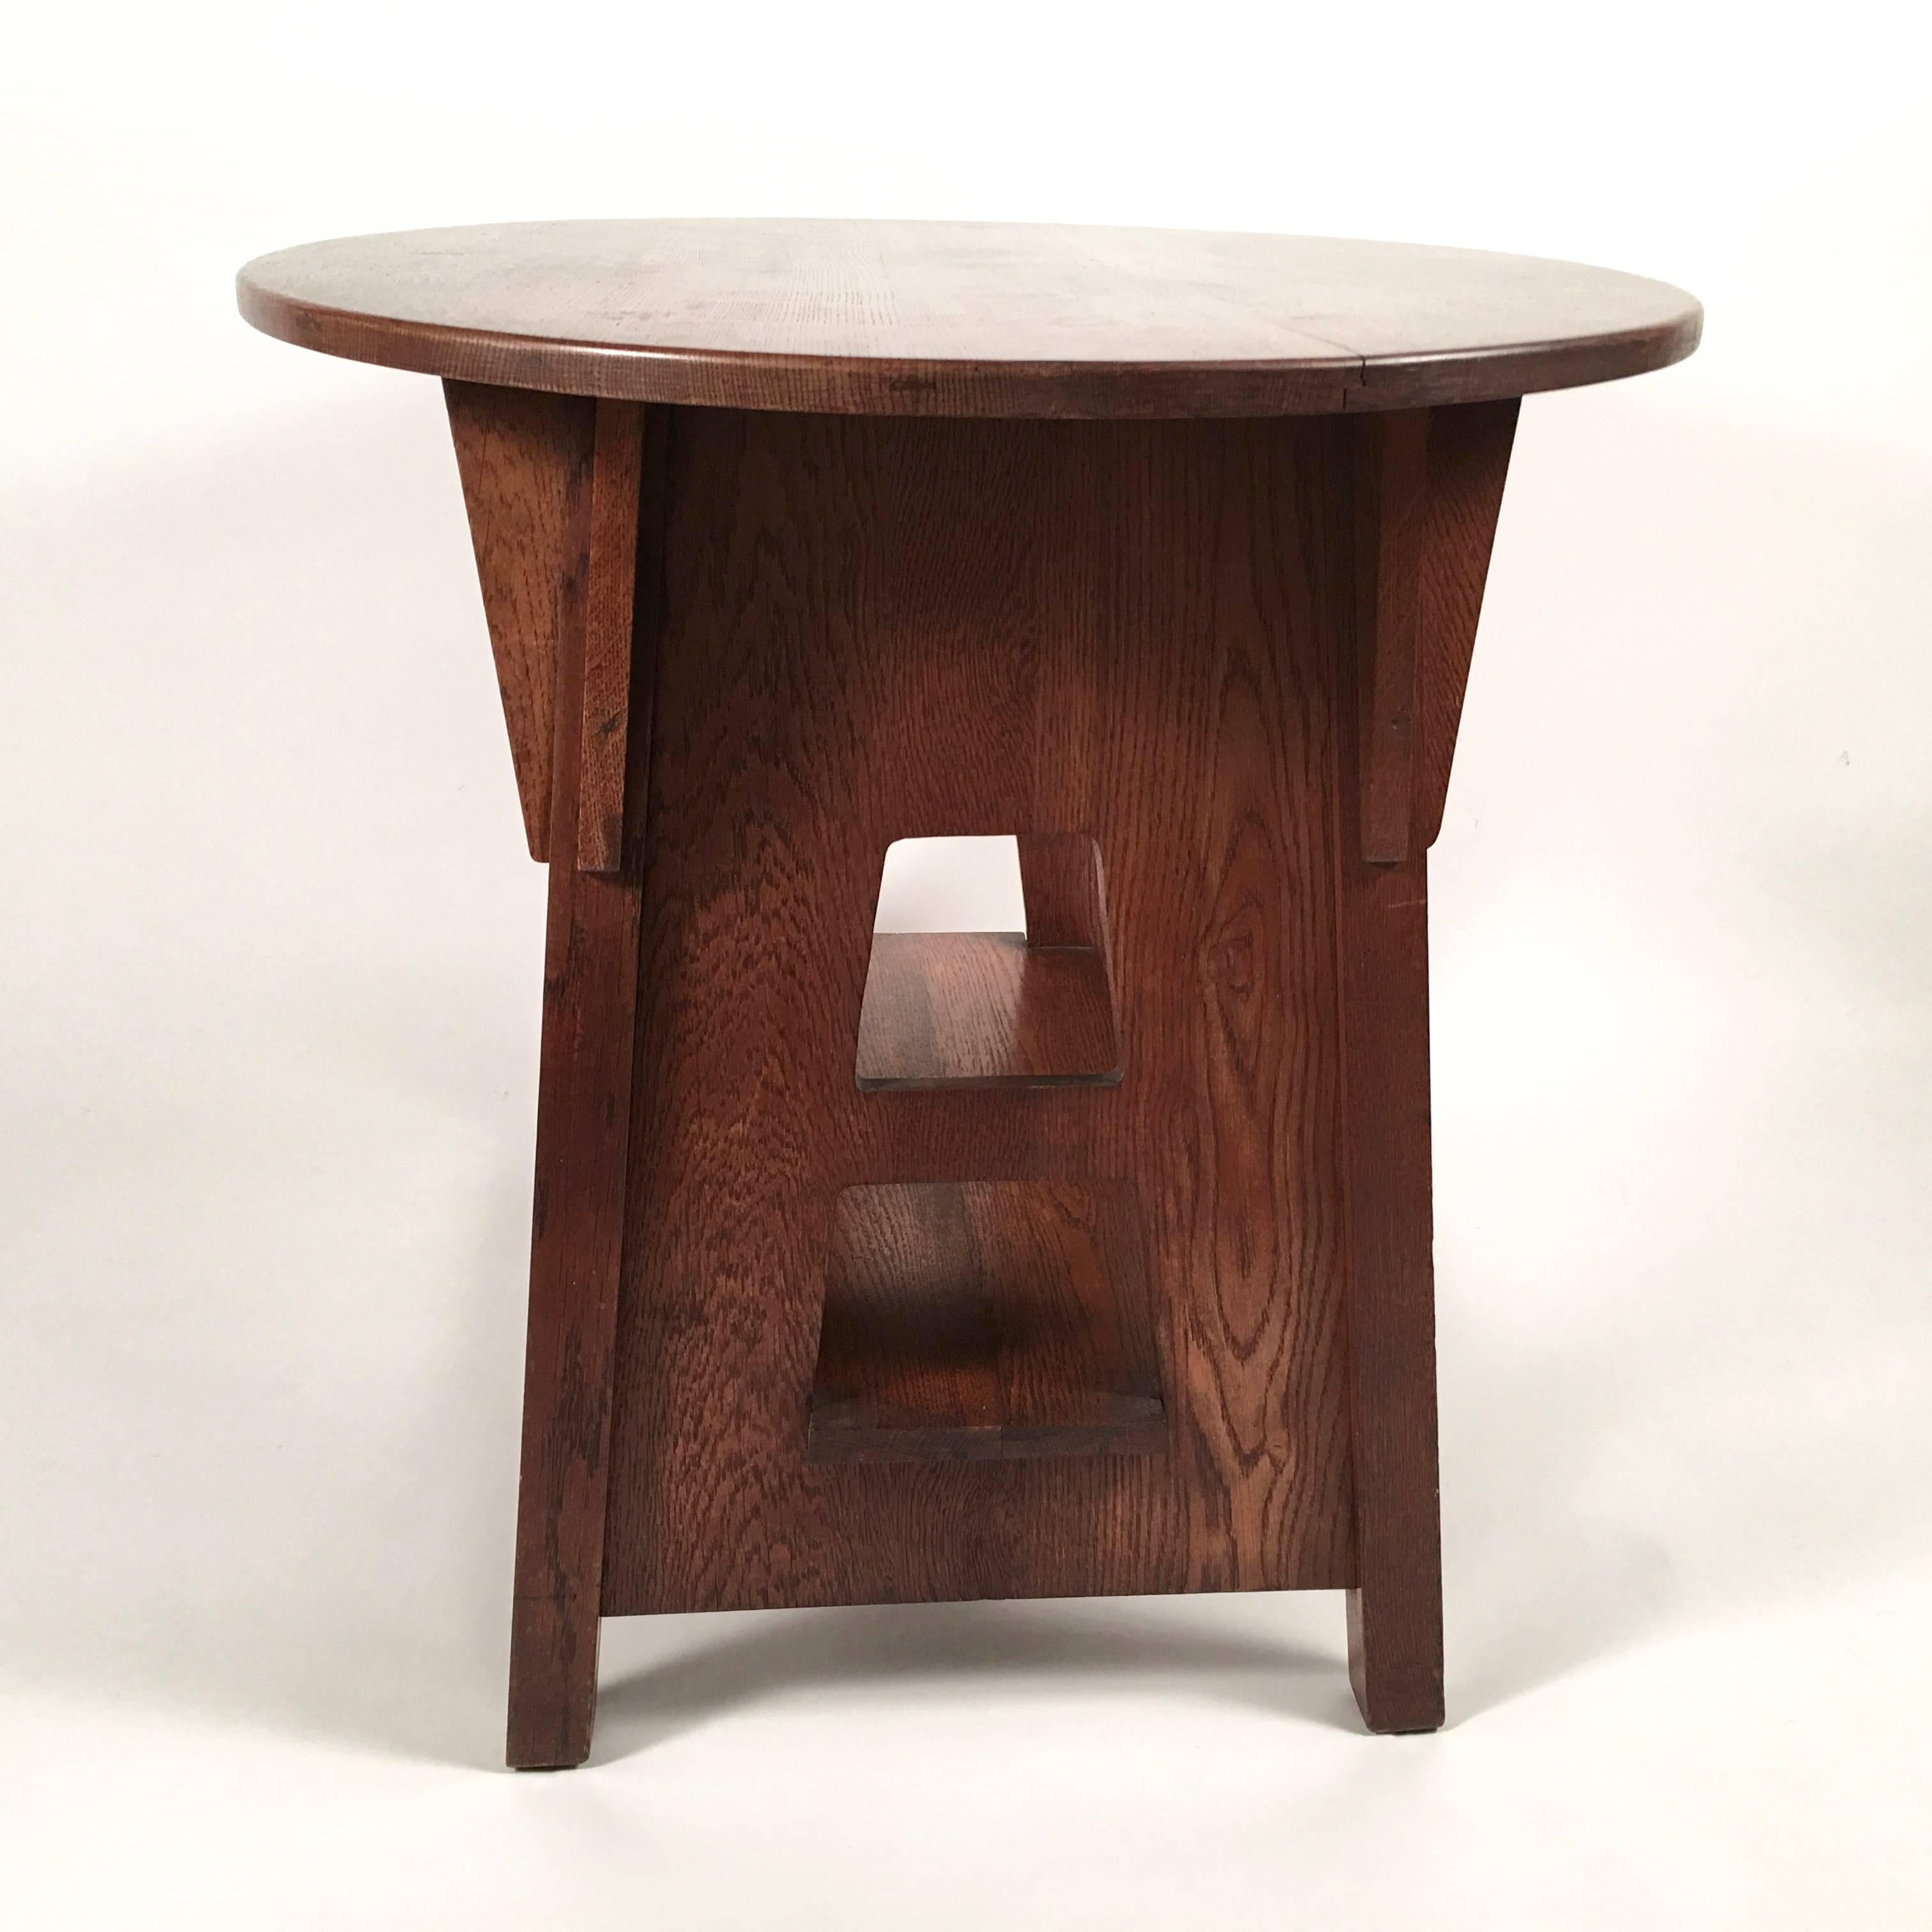 American Arts & Crafts Period Turtle-Back Table by Charles Limbert, circa 1915